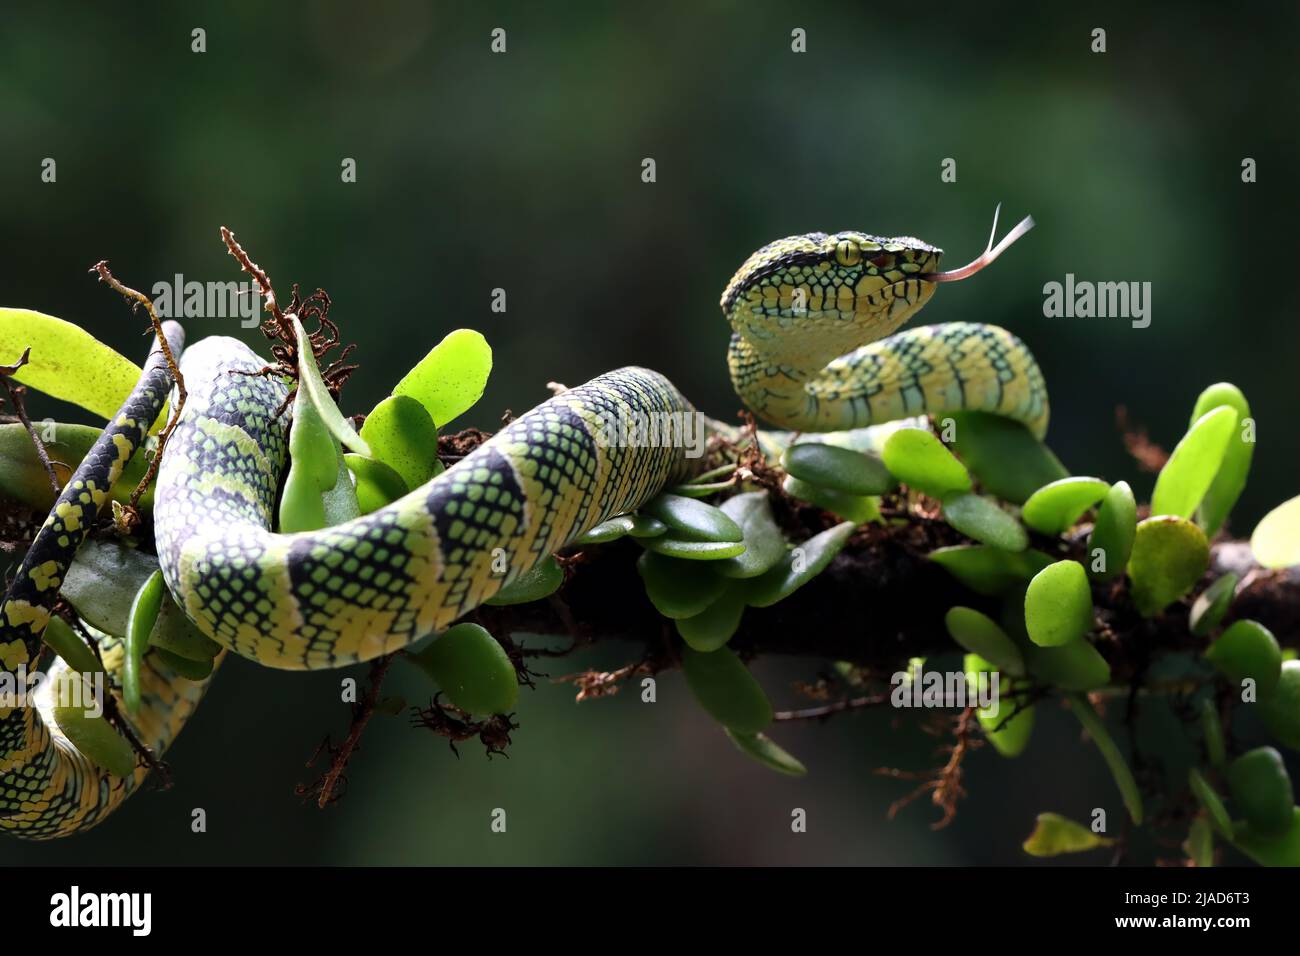 Wagler's Pit Viper snake on a branch, Indonesia Stock Photo